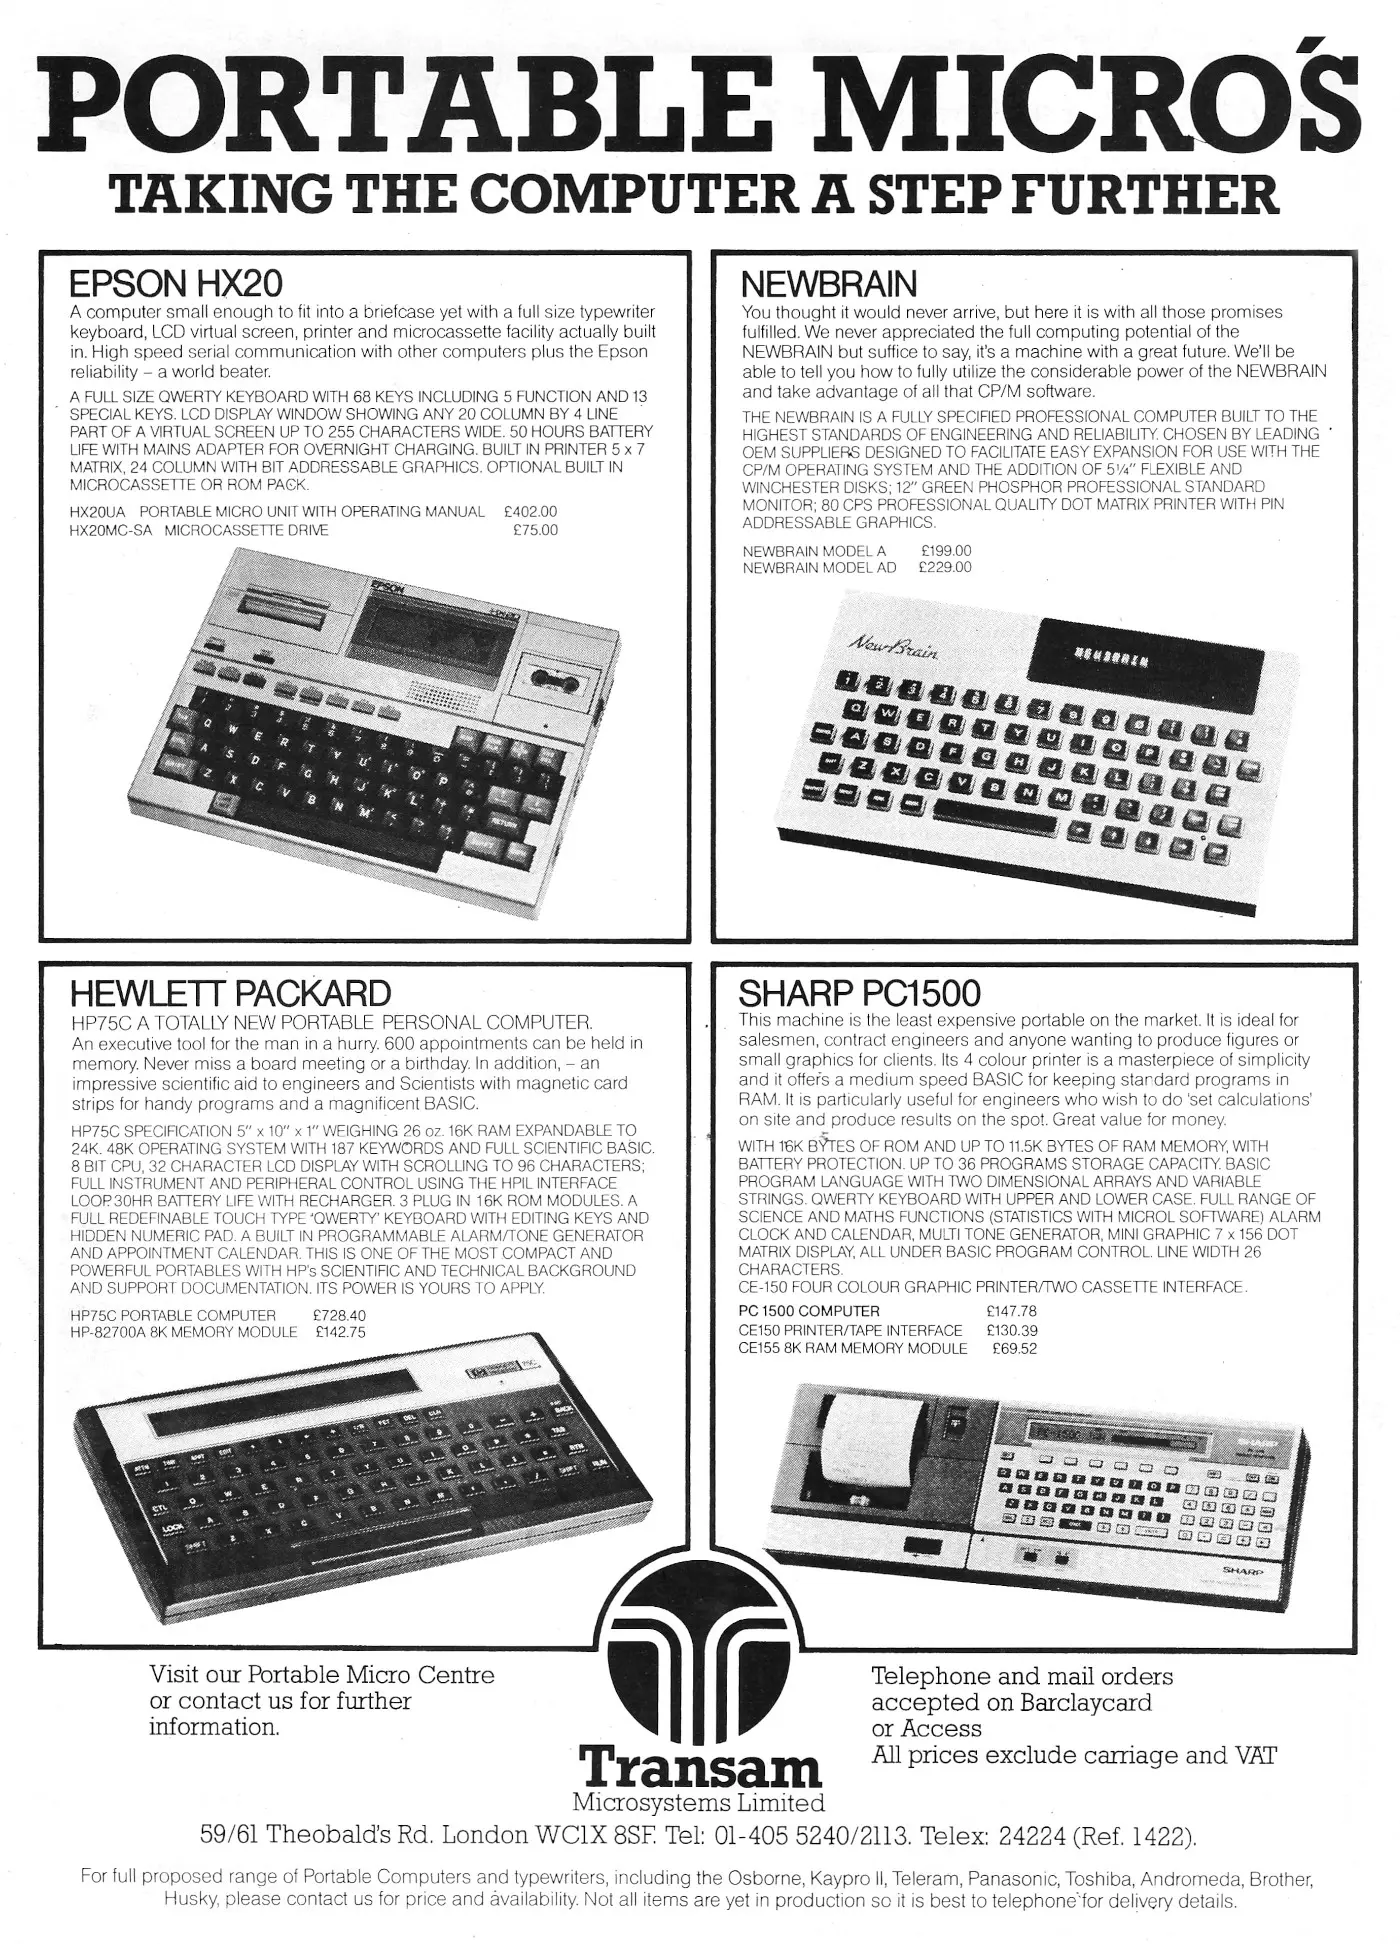 Transam Advert: Portable micros - taking the computer a step further, from Personal Computer World, March 1983